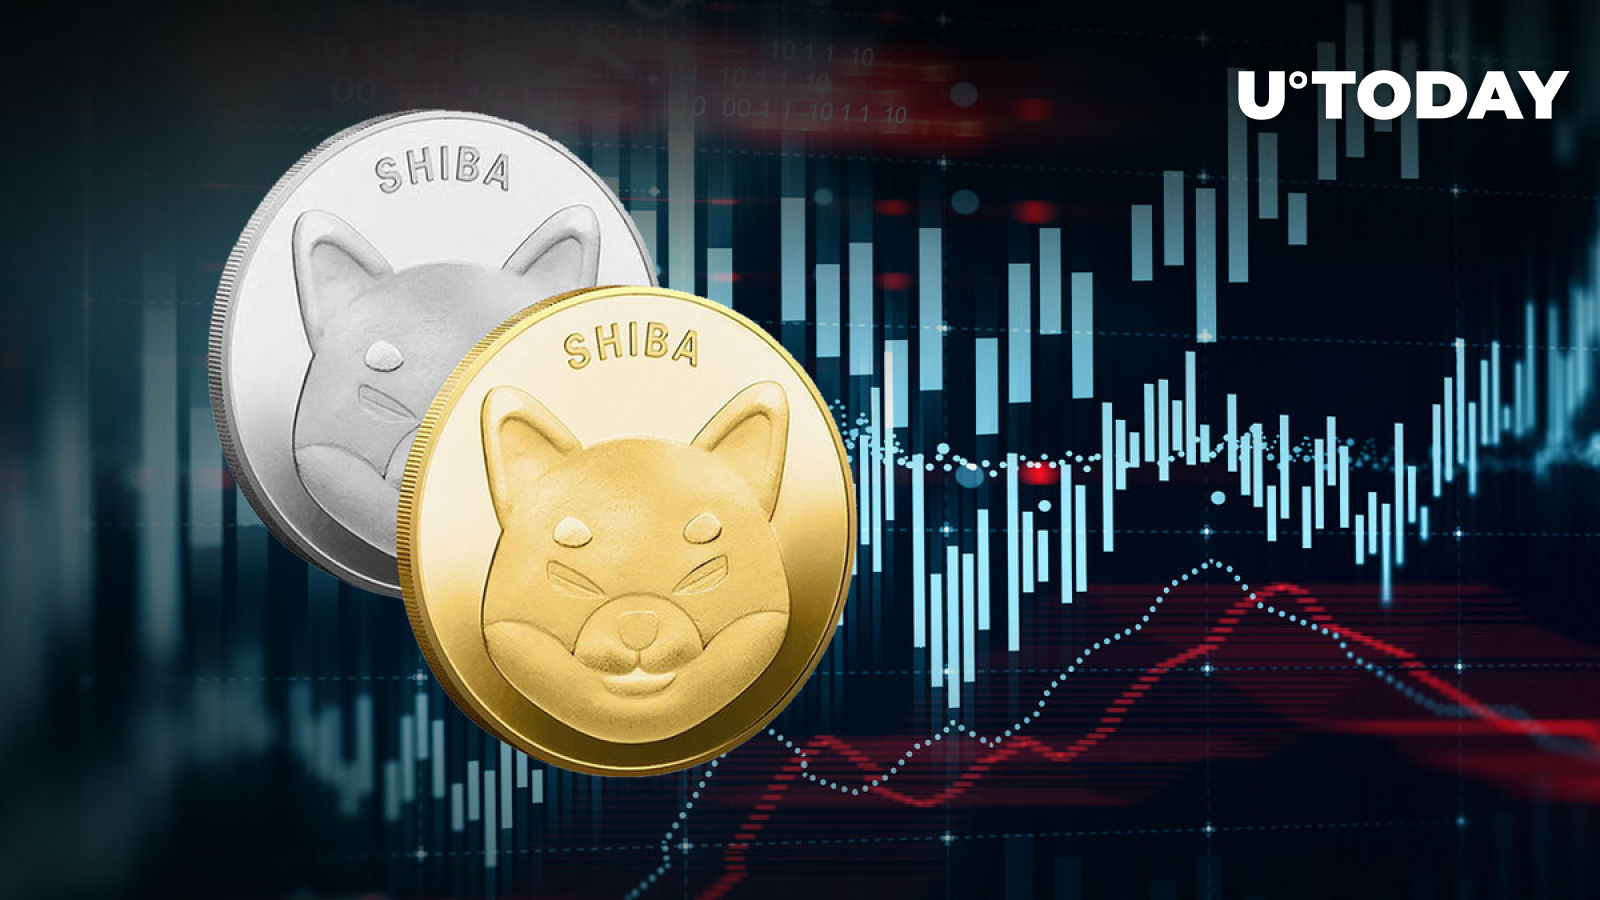 SHIB Shows 7.4 Million Percent Rise in Trading Volume, What’s Happening?